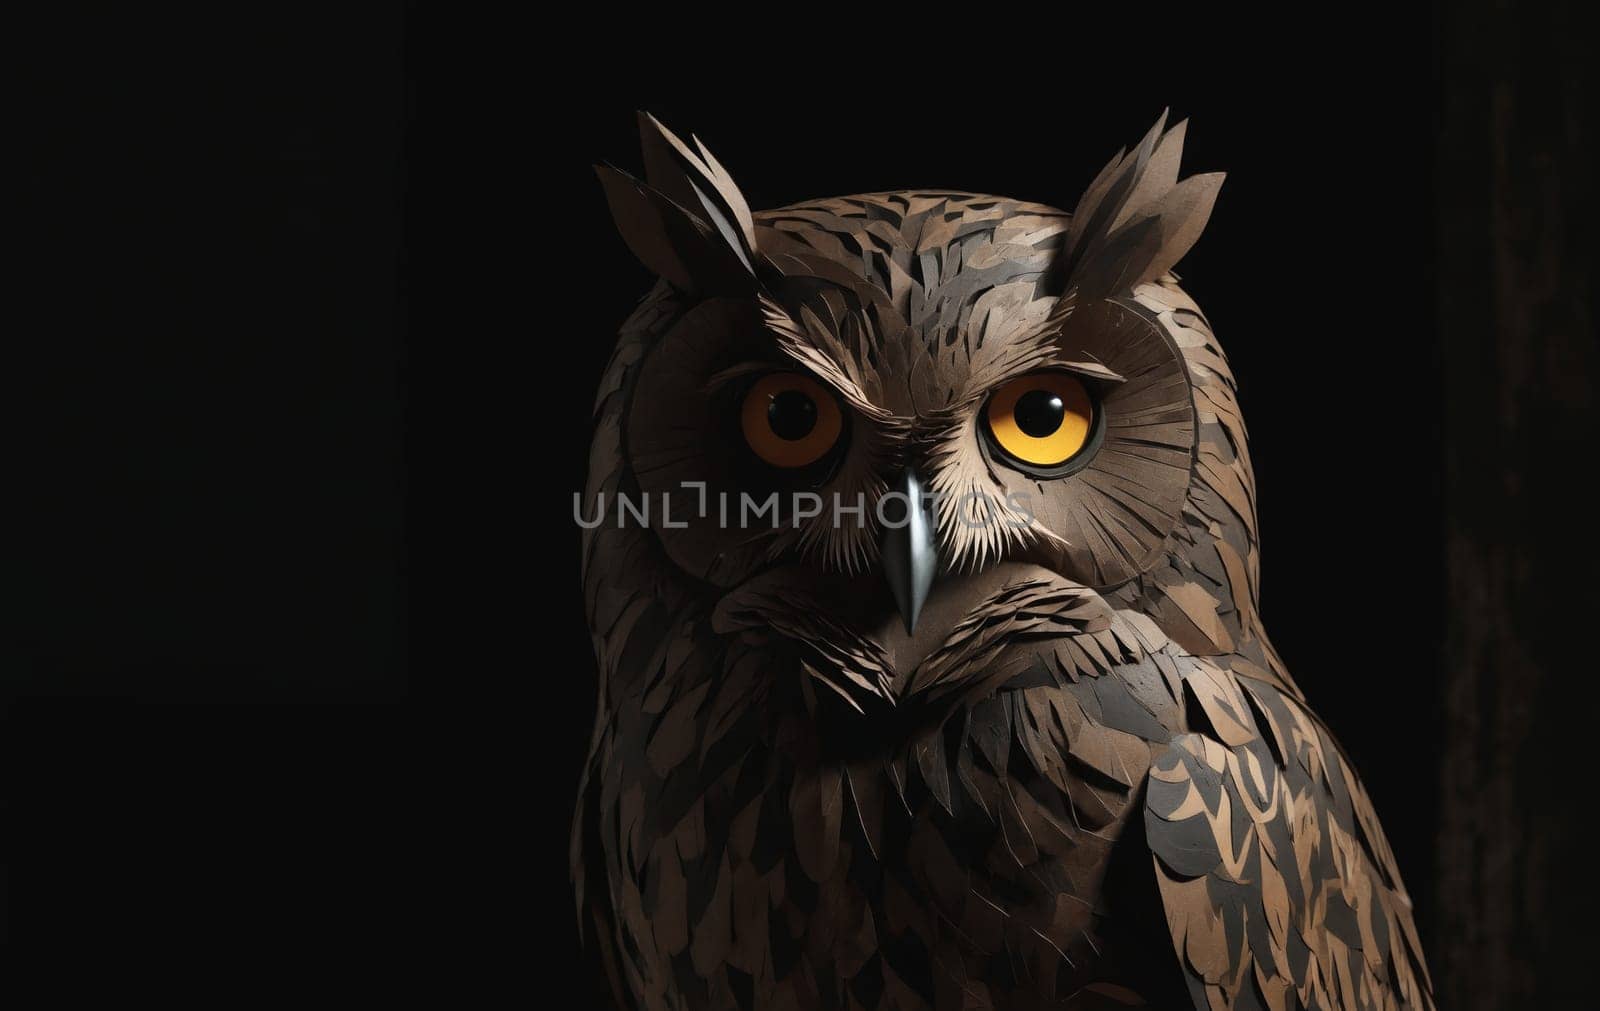 A closeup of an owl with piercing yellow eyes against a dark black background. This bird of prey belongs to the Accipitriformes order and is known for its exceptional vision in darkness